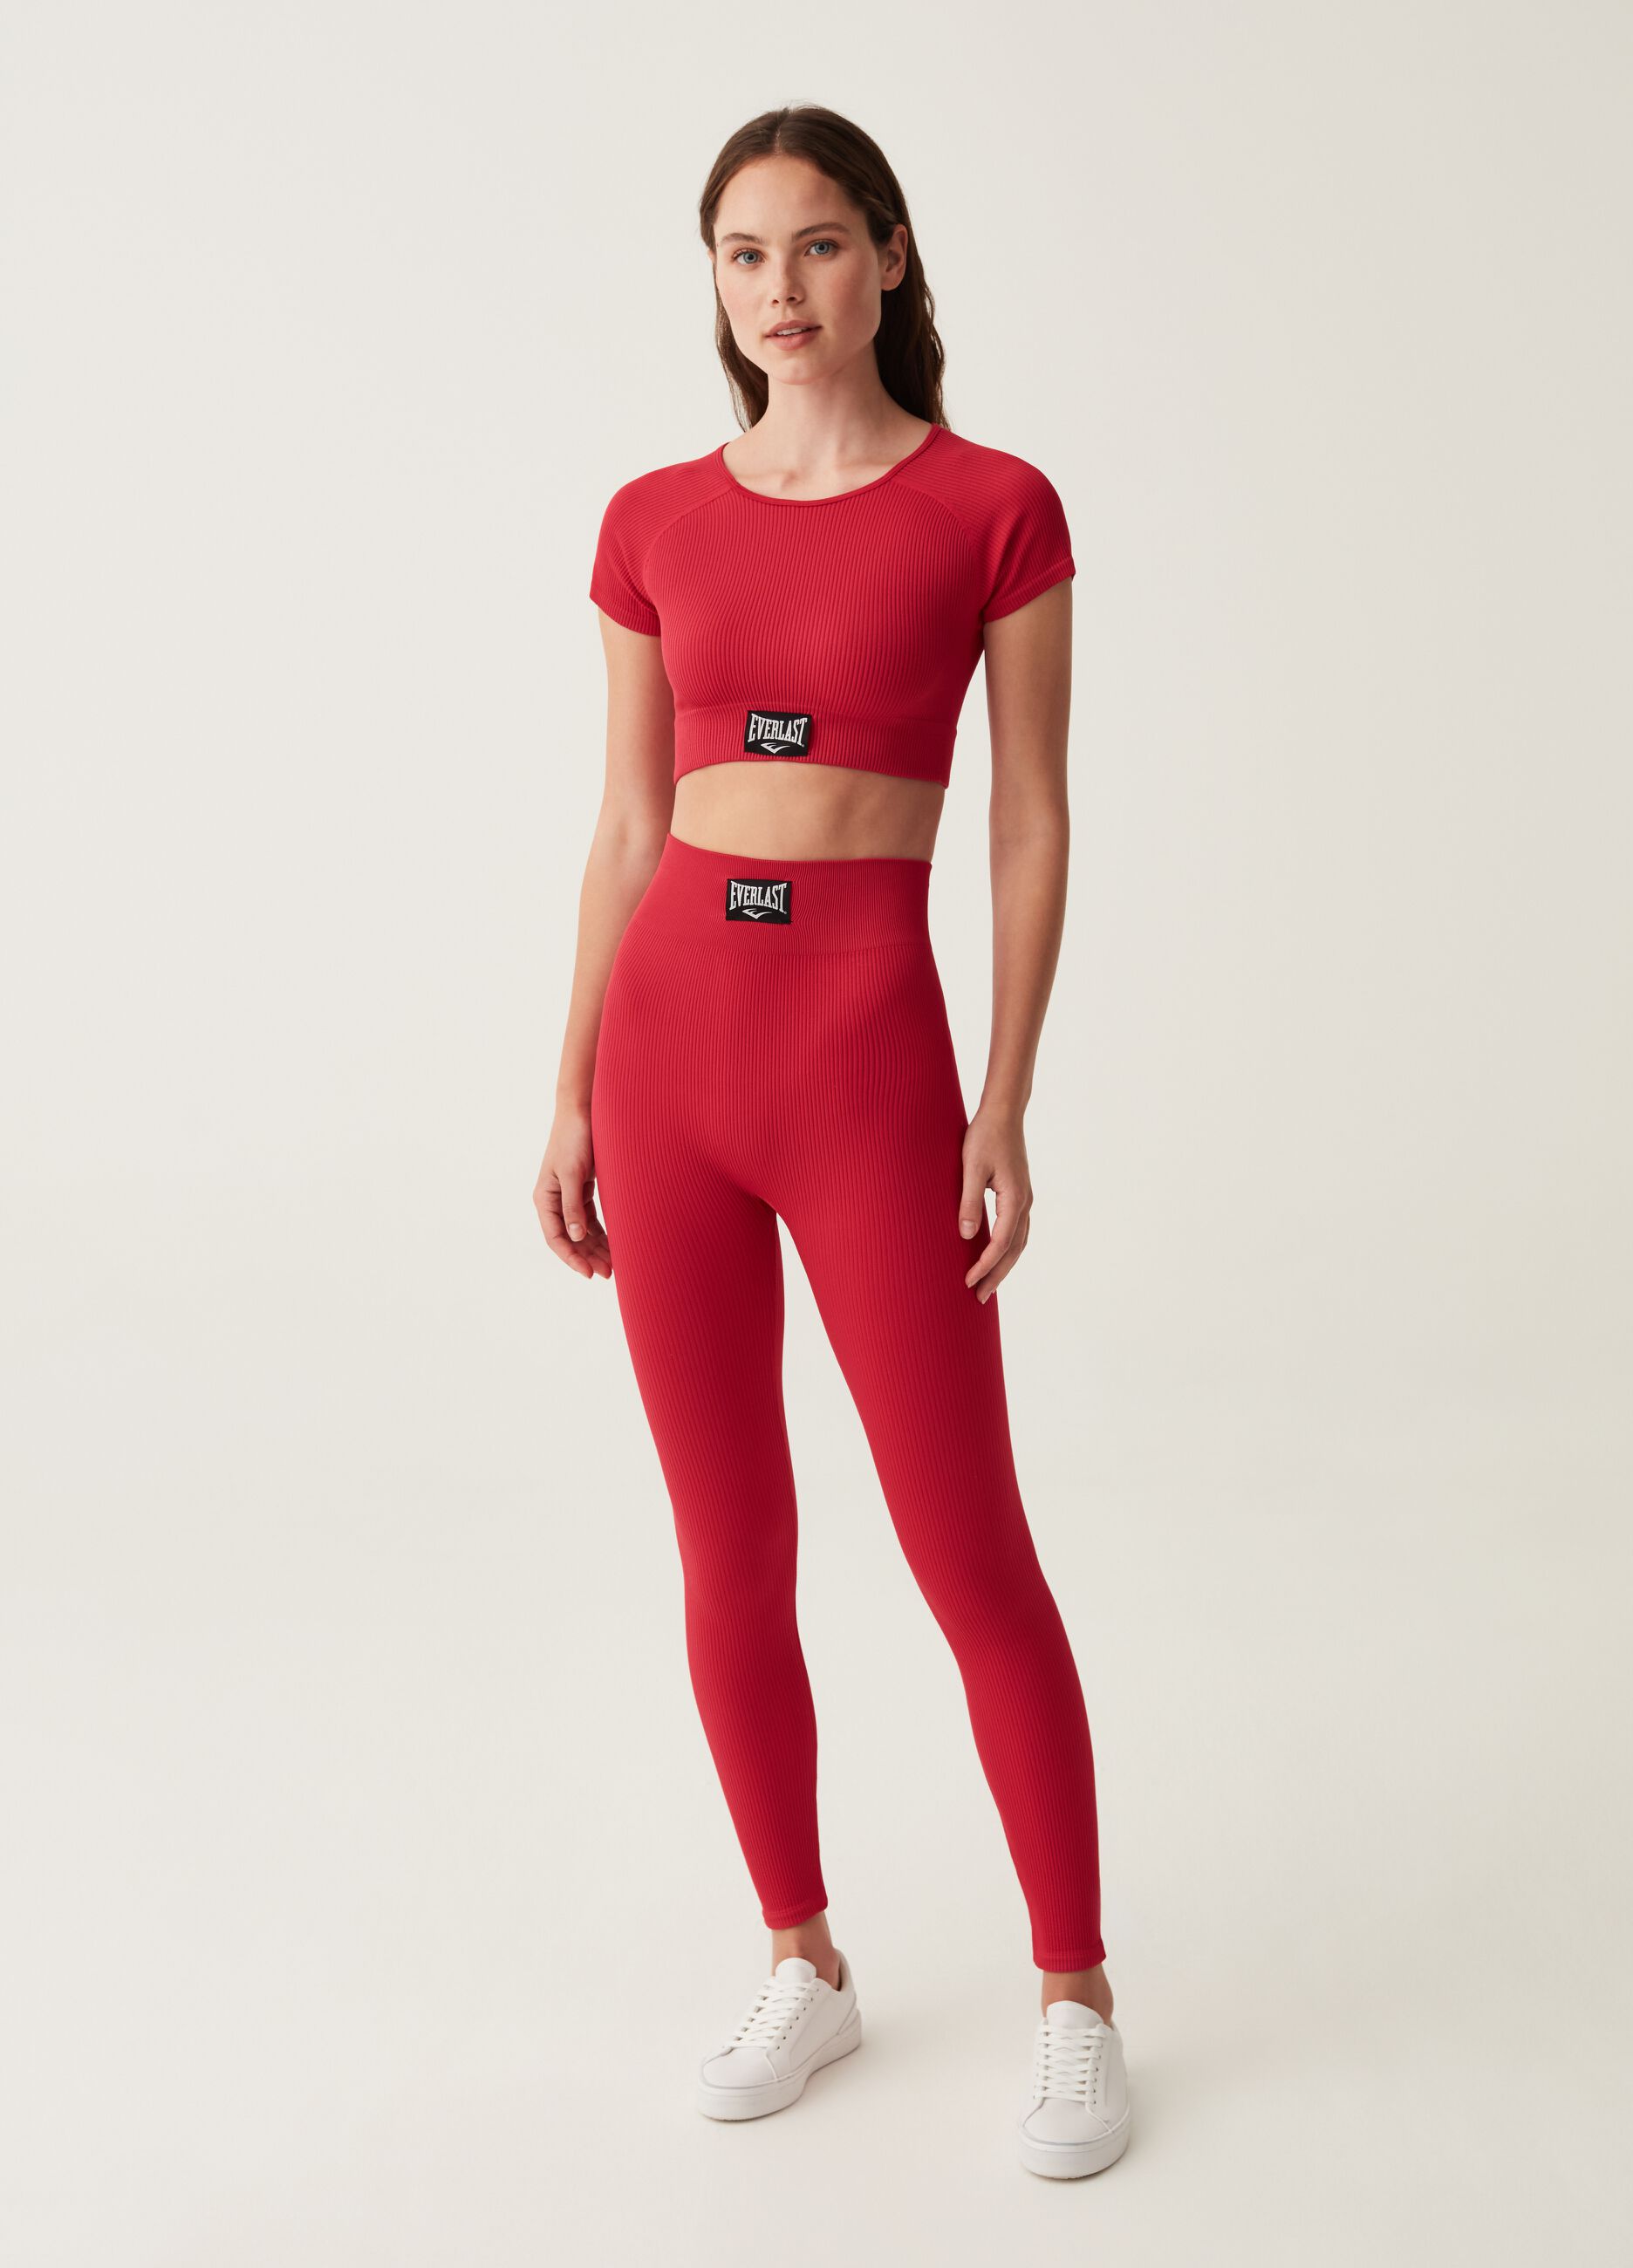 EVERLAST Woman's Strawberry Red Stretch ribbed leggings